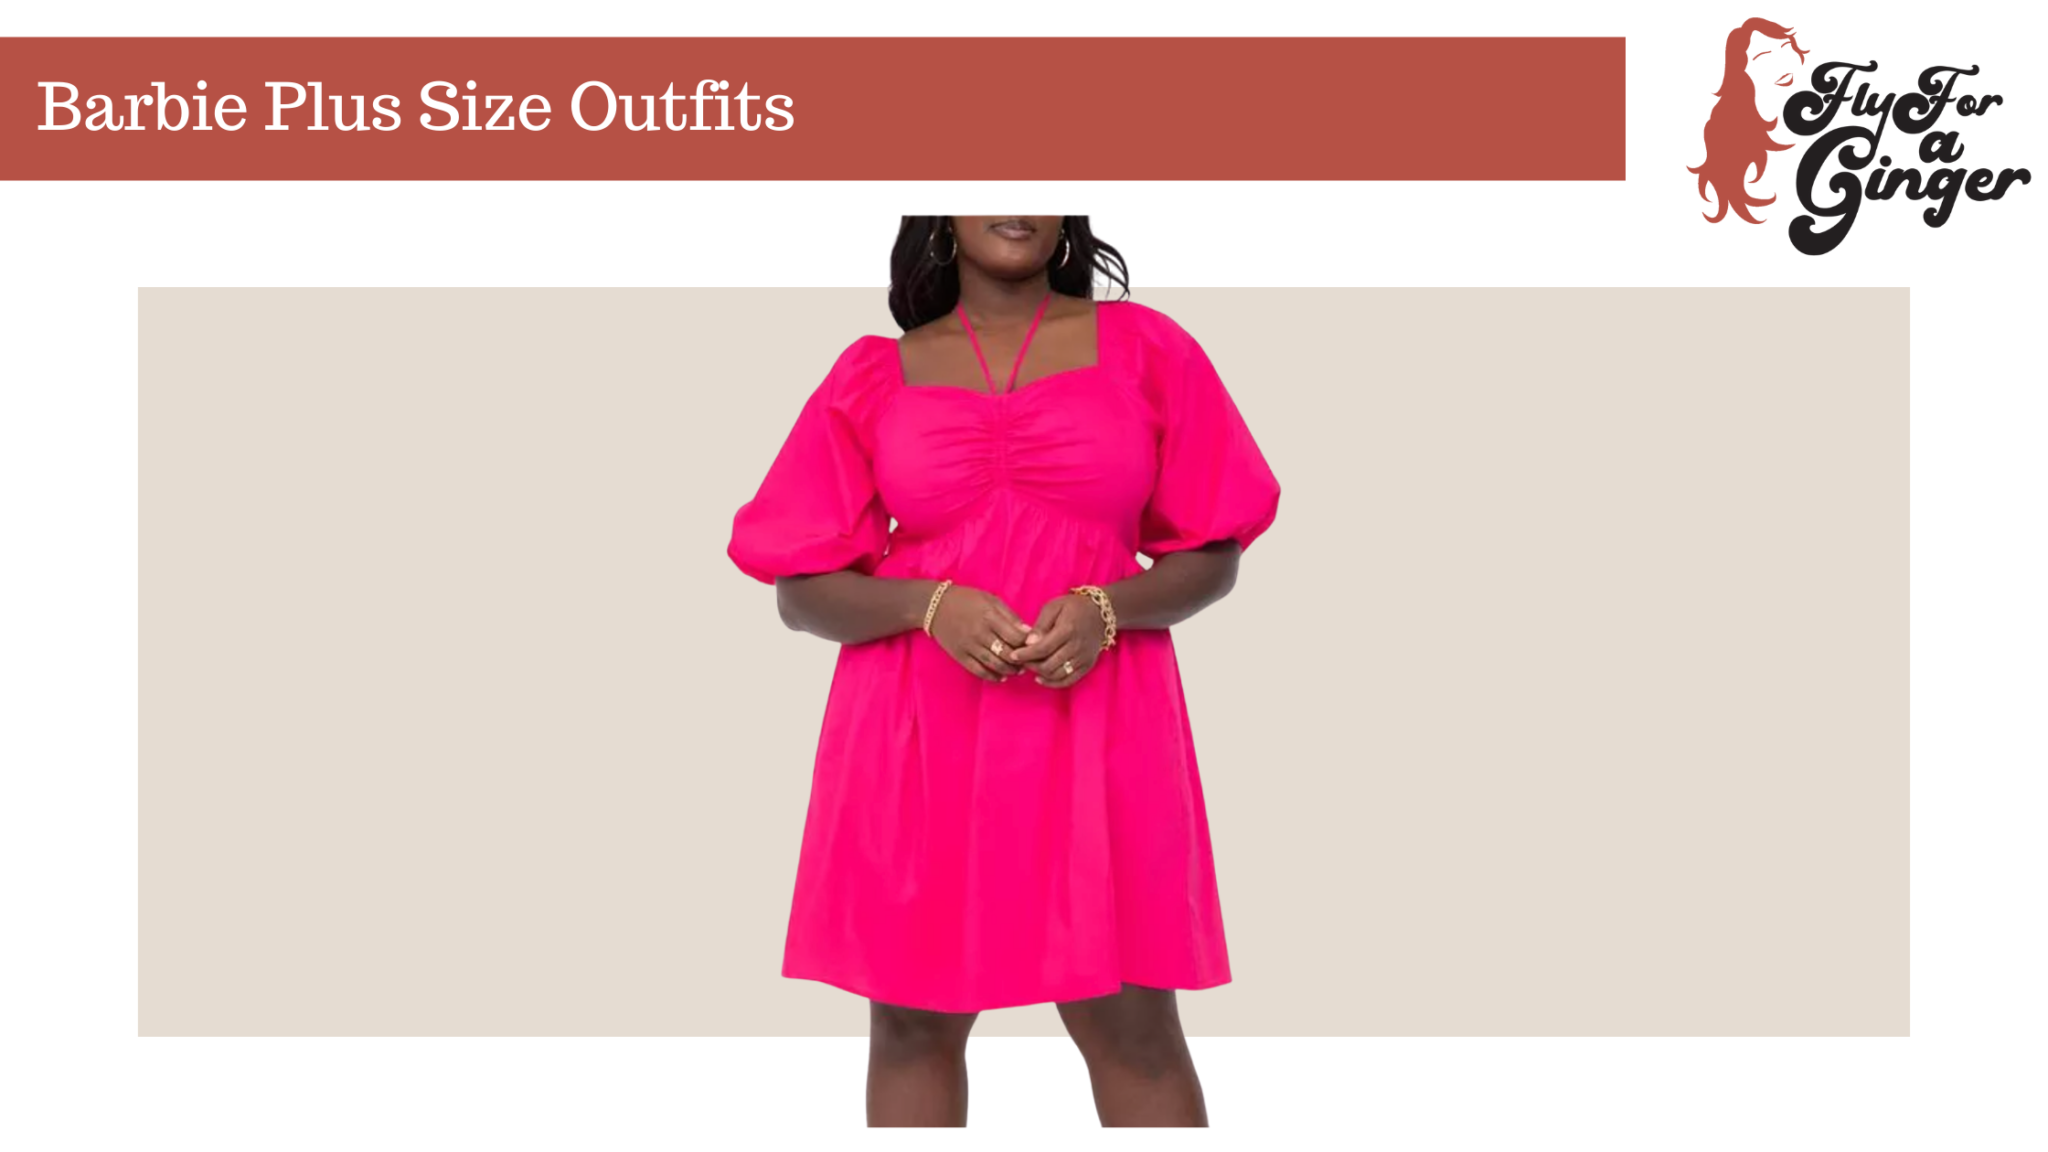 Barbie Plus Size Outfits // Where to Find Curvy Barbie Clothes